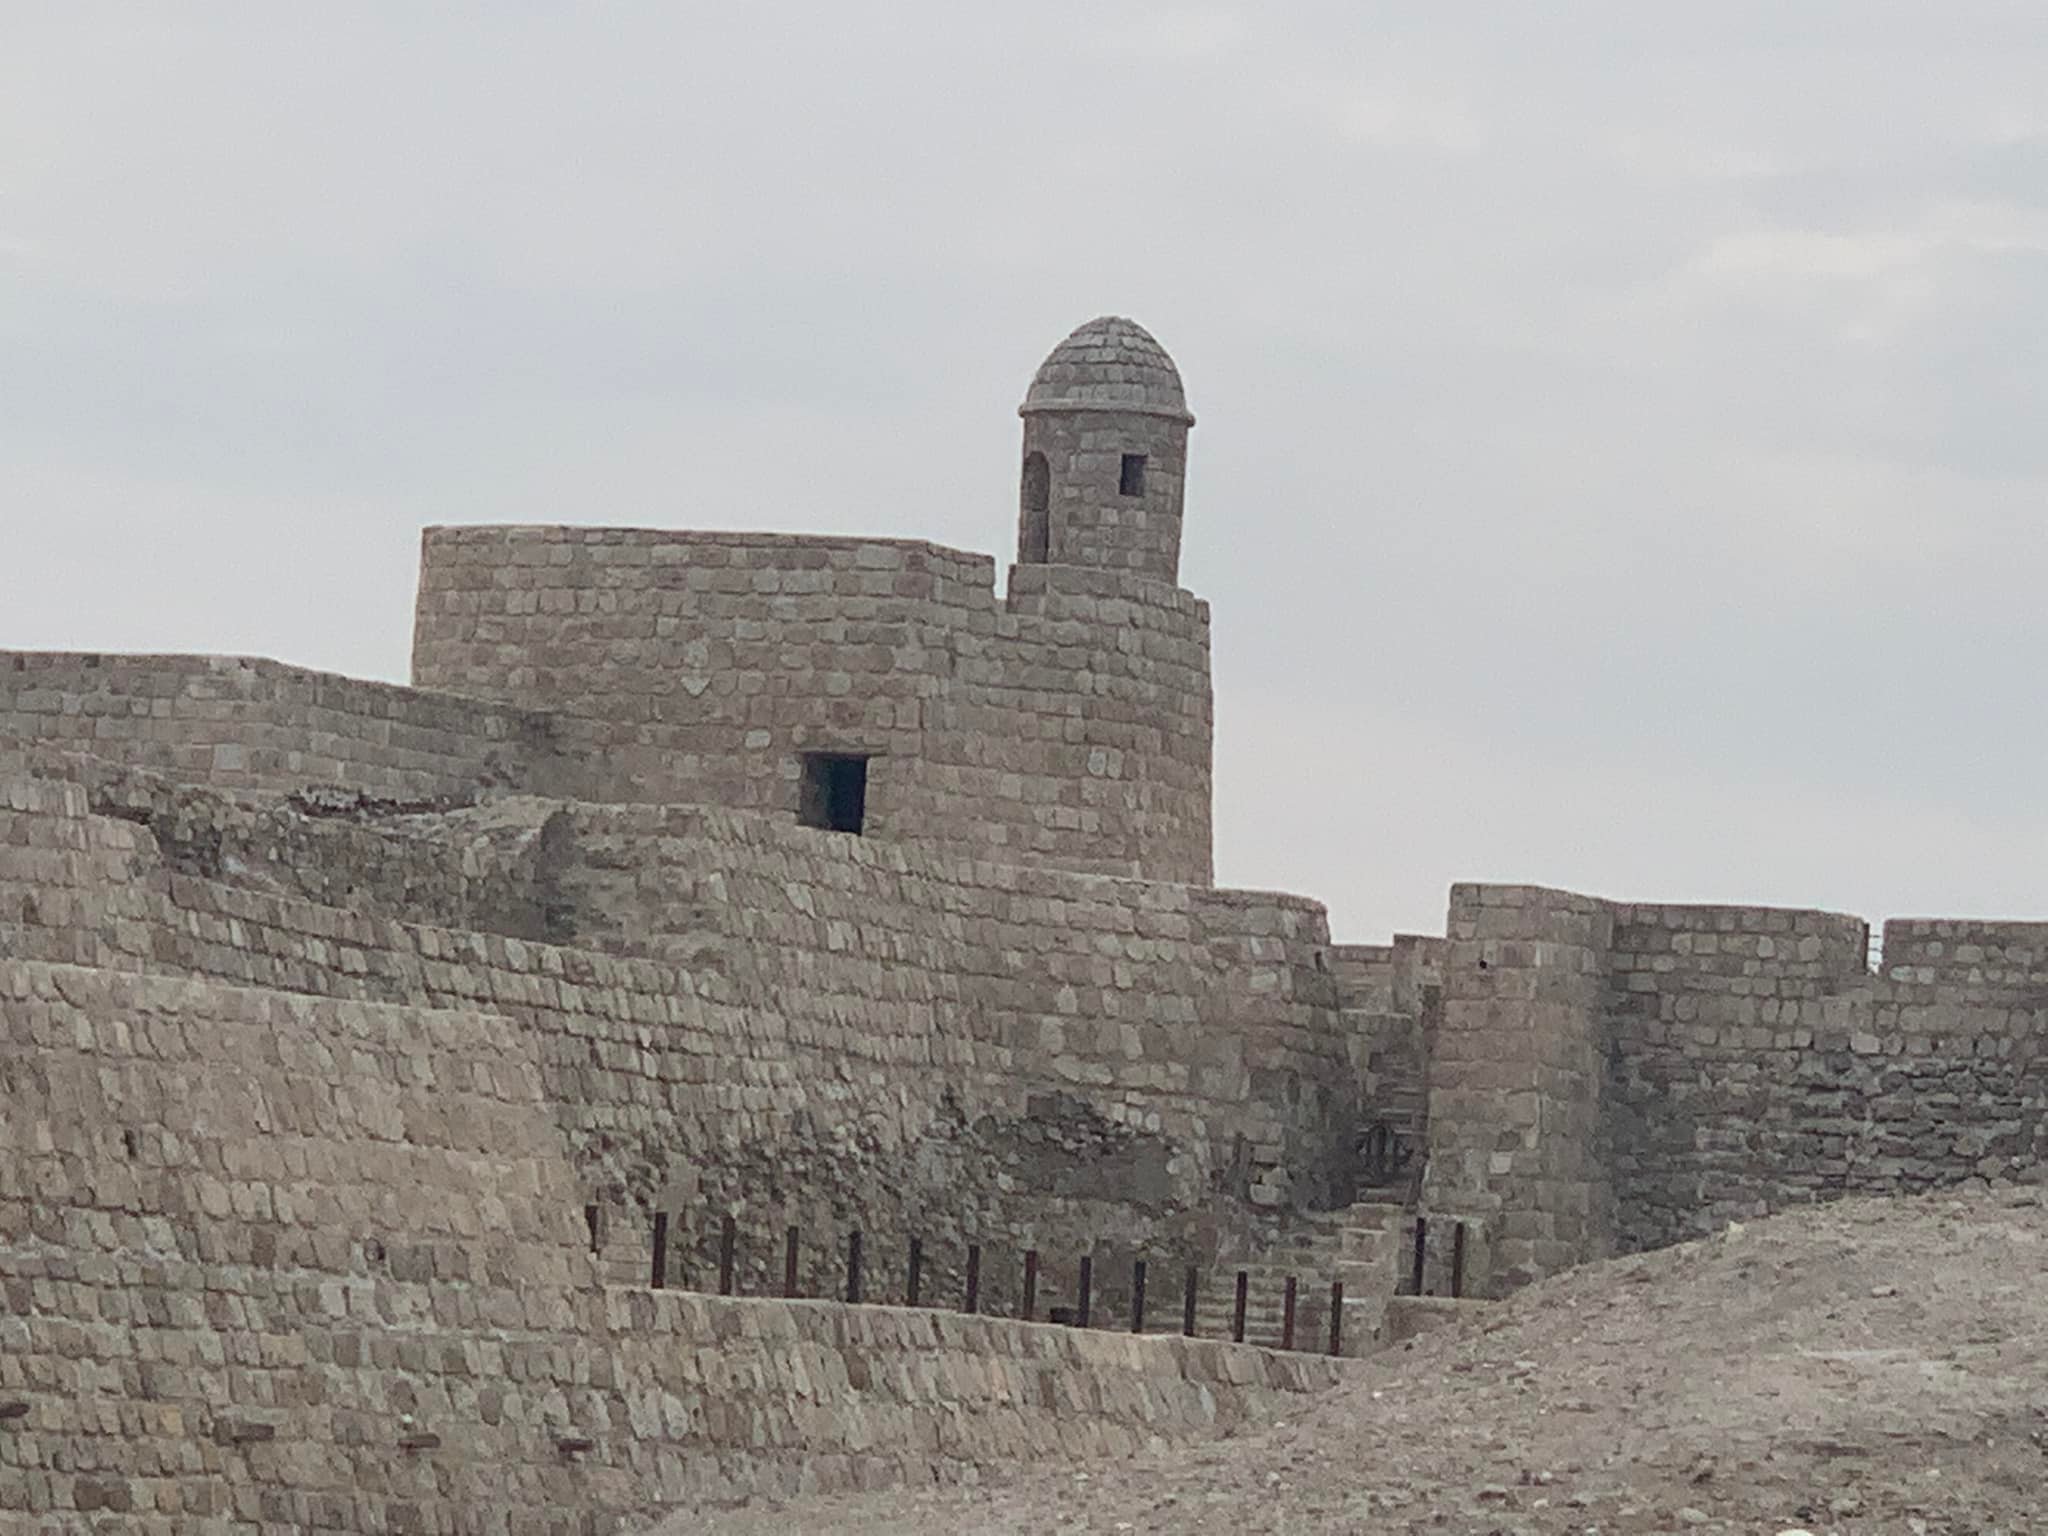 Qalaat al-Bahrain, Bahrain’s citadel and one of the oldest human settlement in the Persian Gulf.